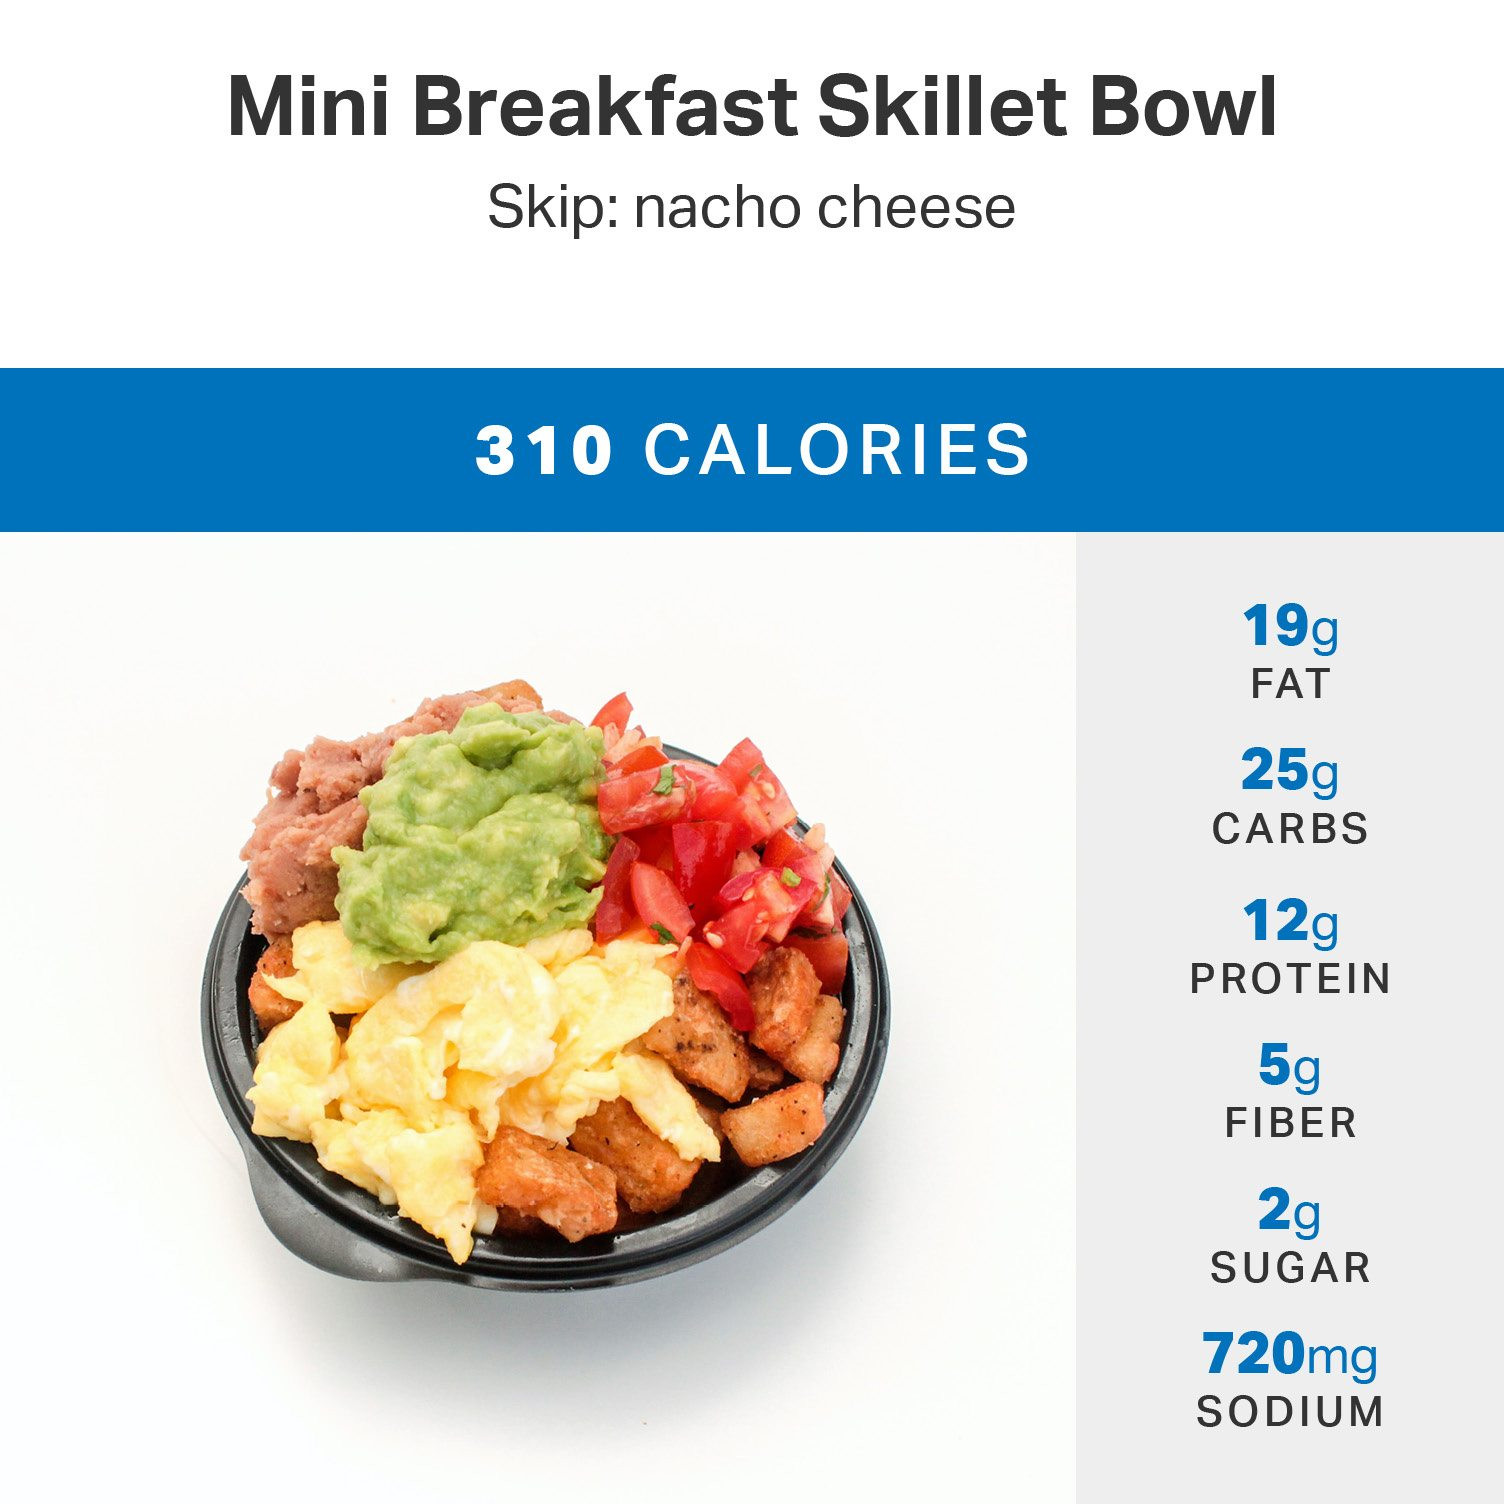 Healthy Taco Bell Breakfast
 Healthy Ways to Order at Taco Bell